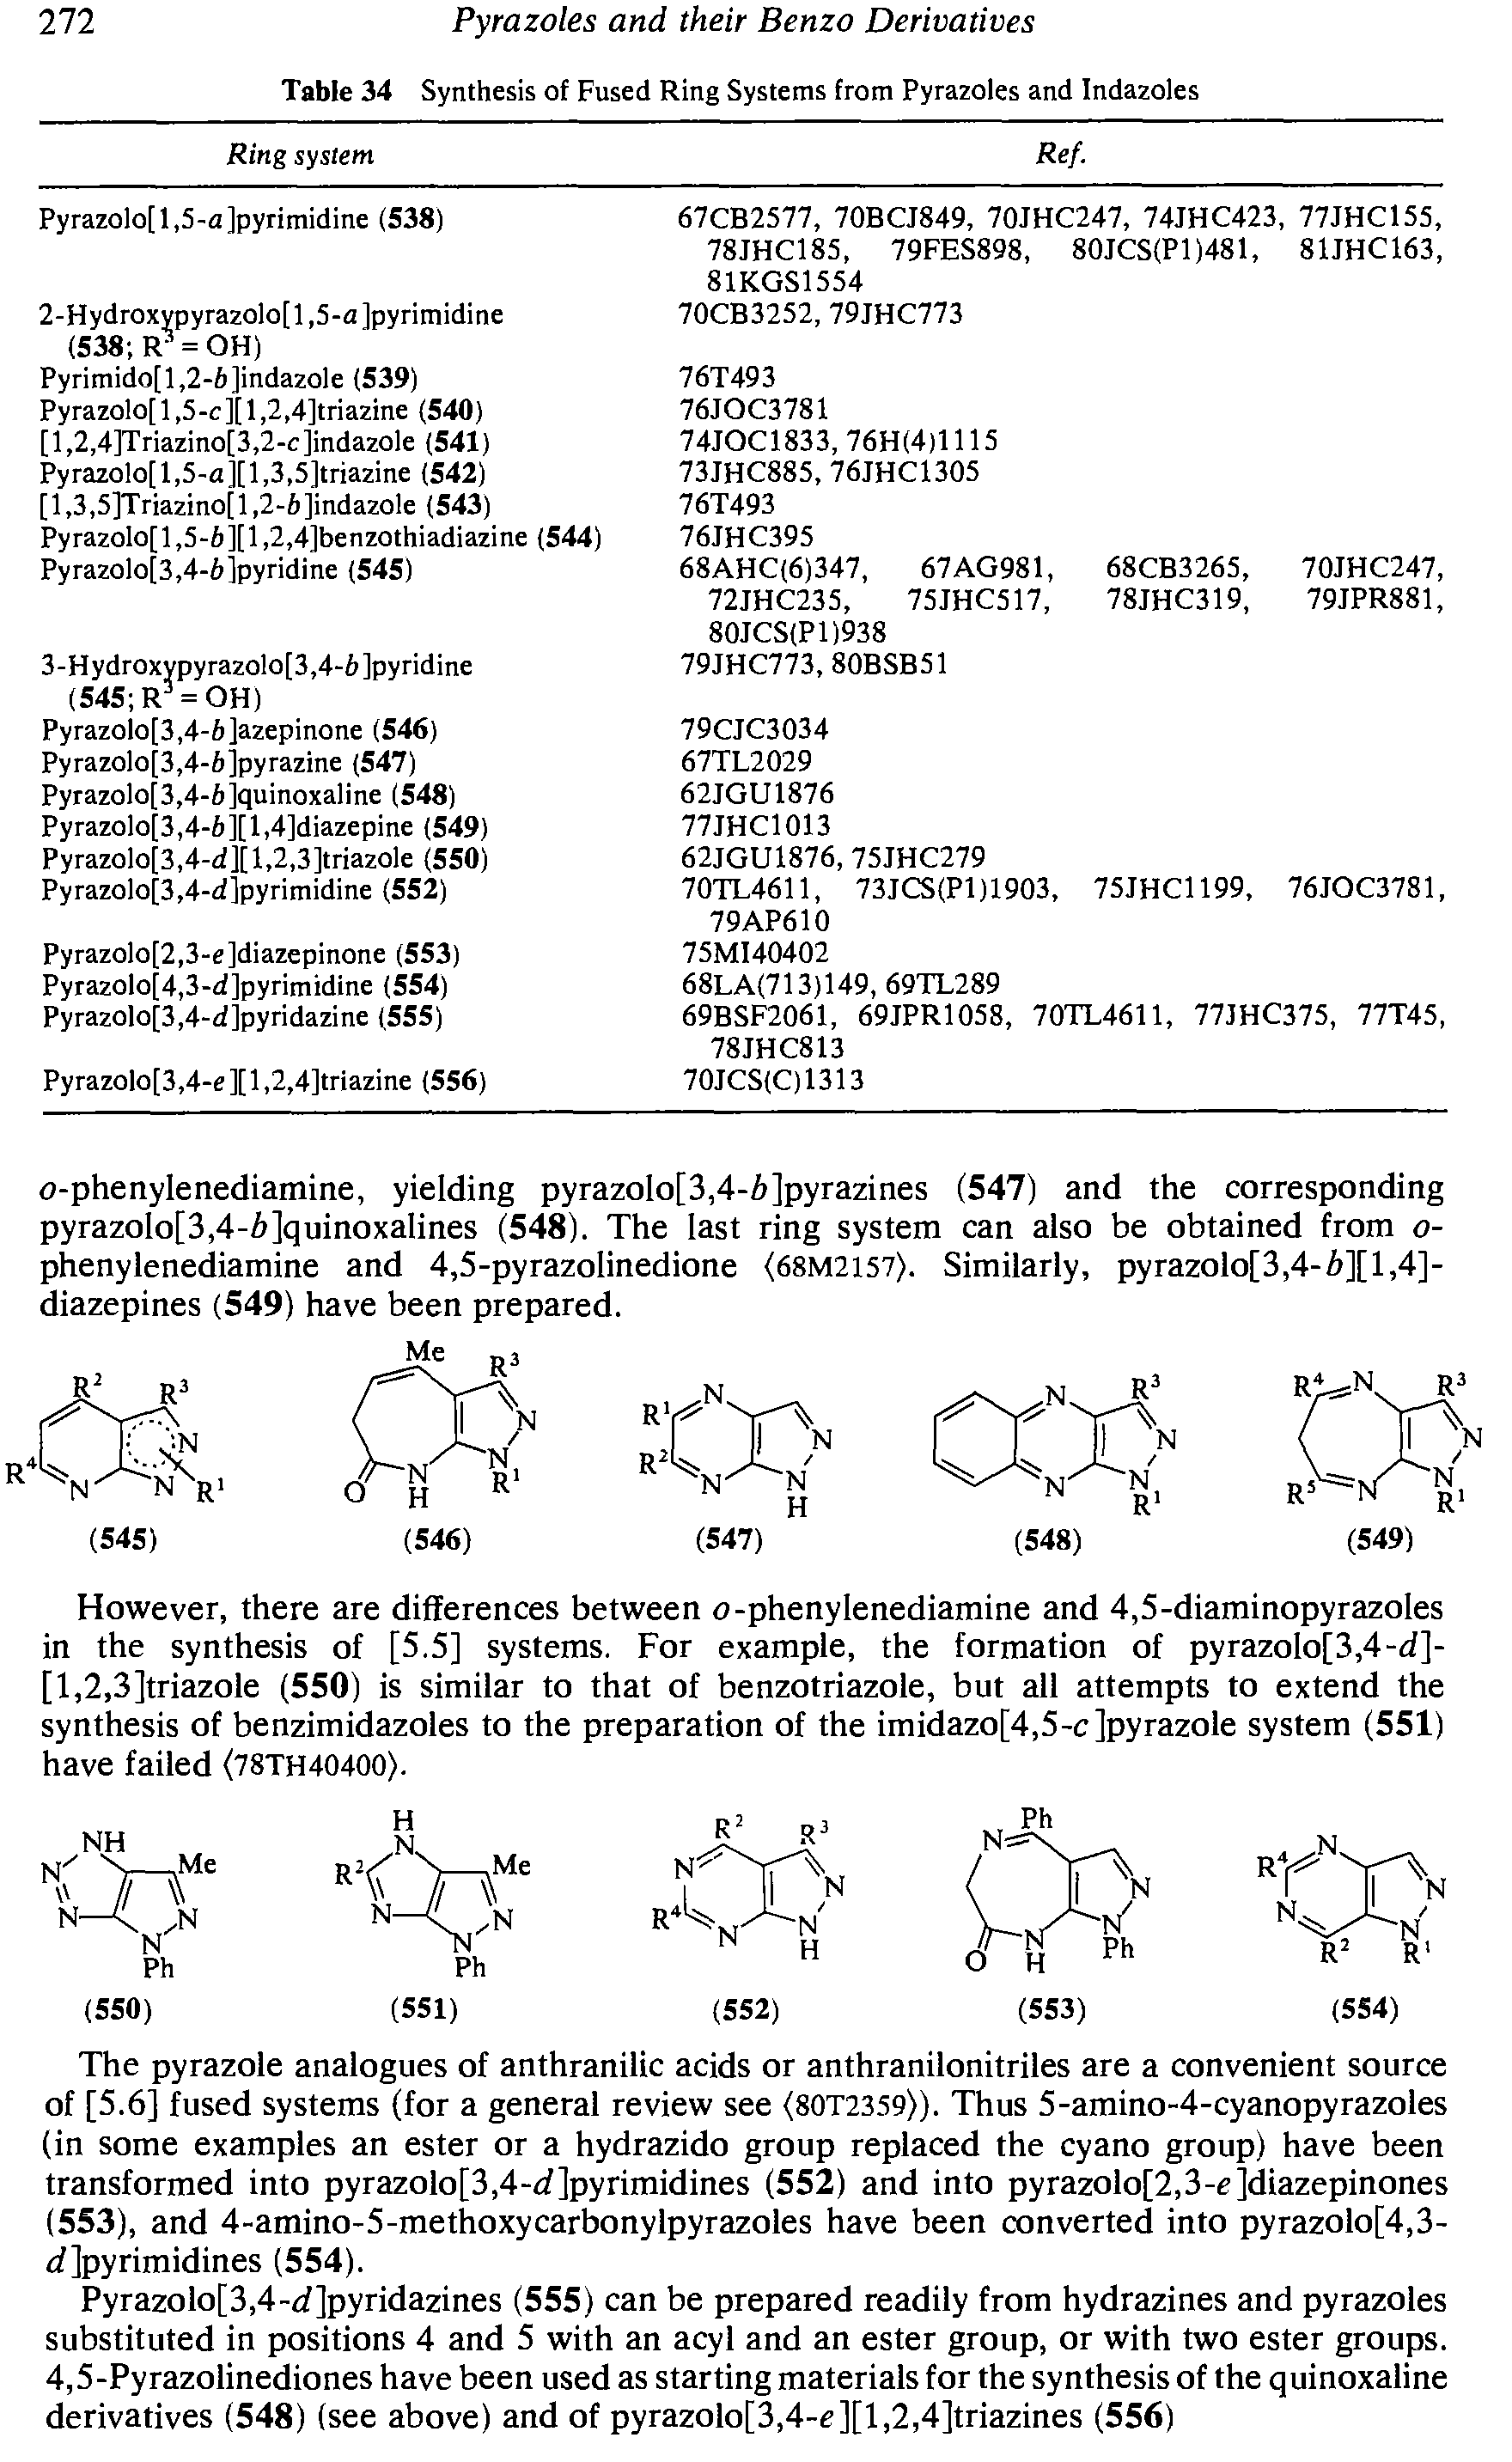 Table 34 Synthesis of Fused Ring Systems from Pyrazoles and Indazoles...